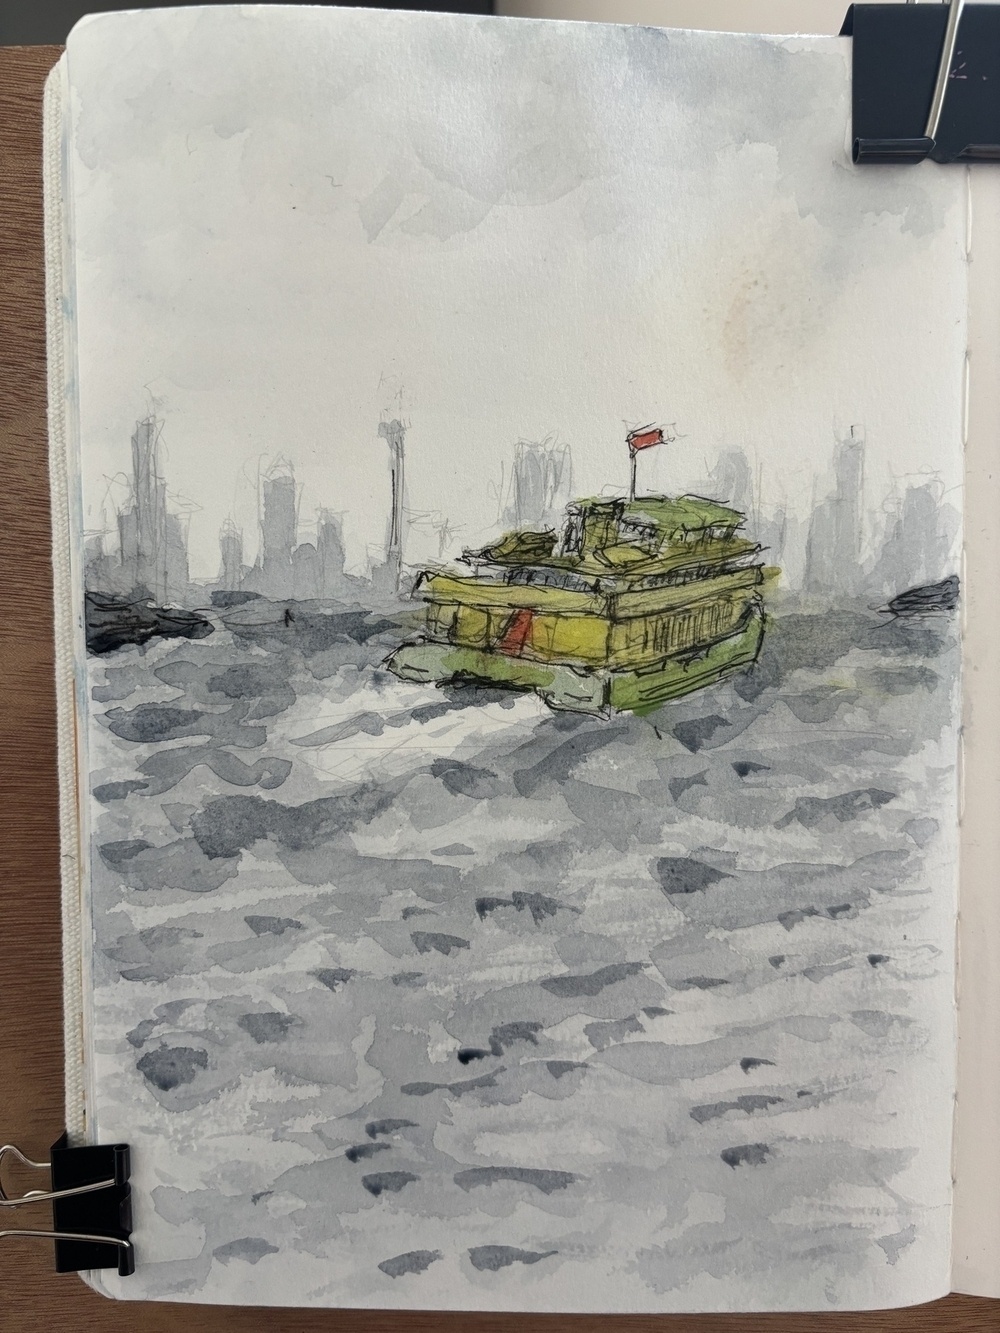 ‘A yellow and green Sydney ferry on a stormy day’